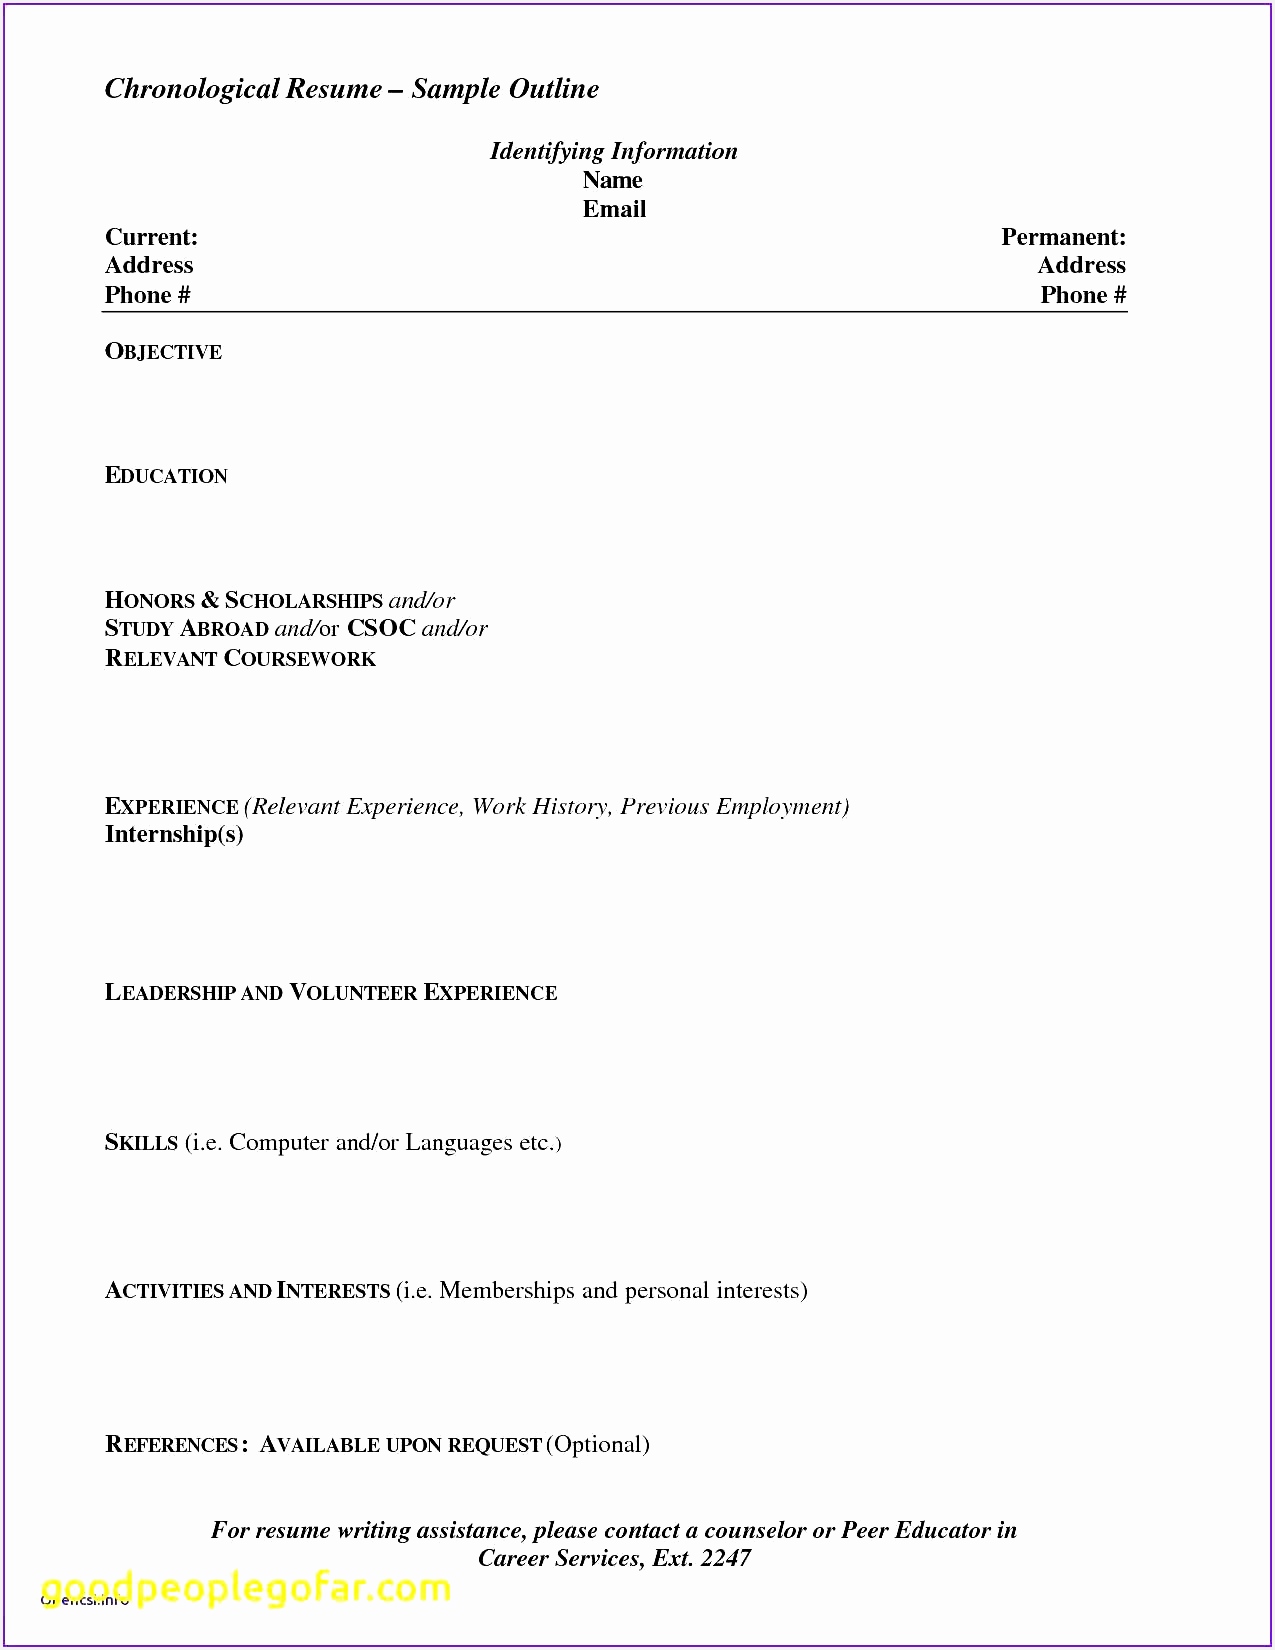 Free Sample Resume Fresh Resume Templats Unique formatted Resume 0d Elegant Invoice Template Google Docs from16501275